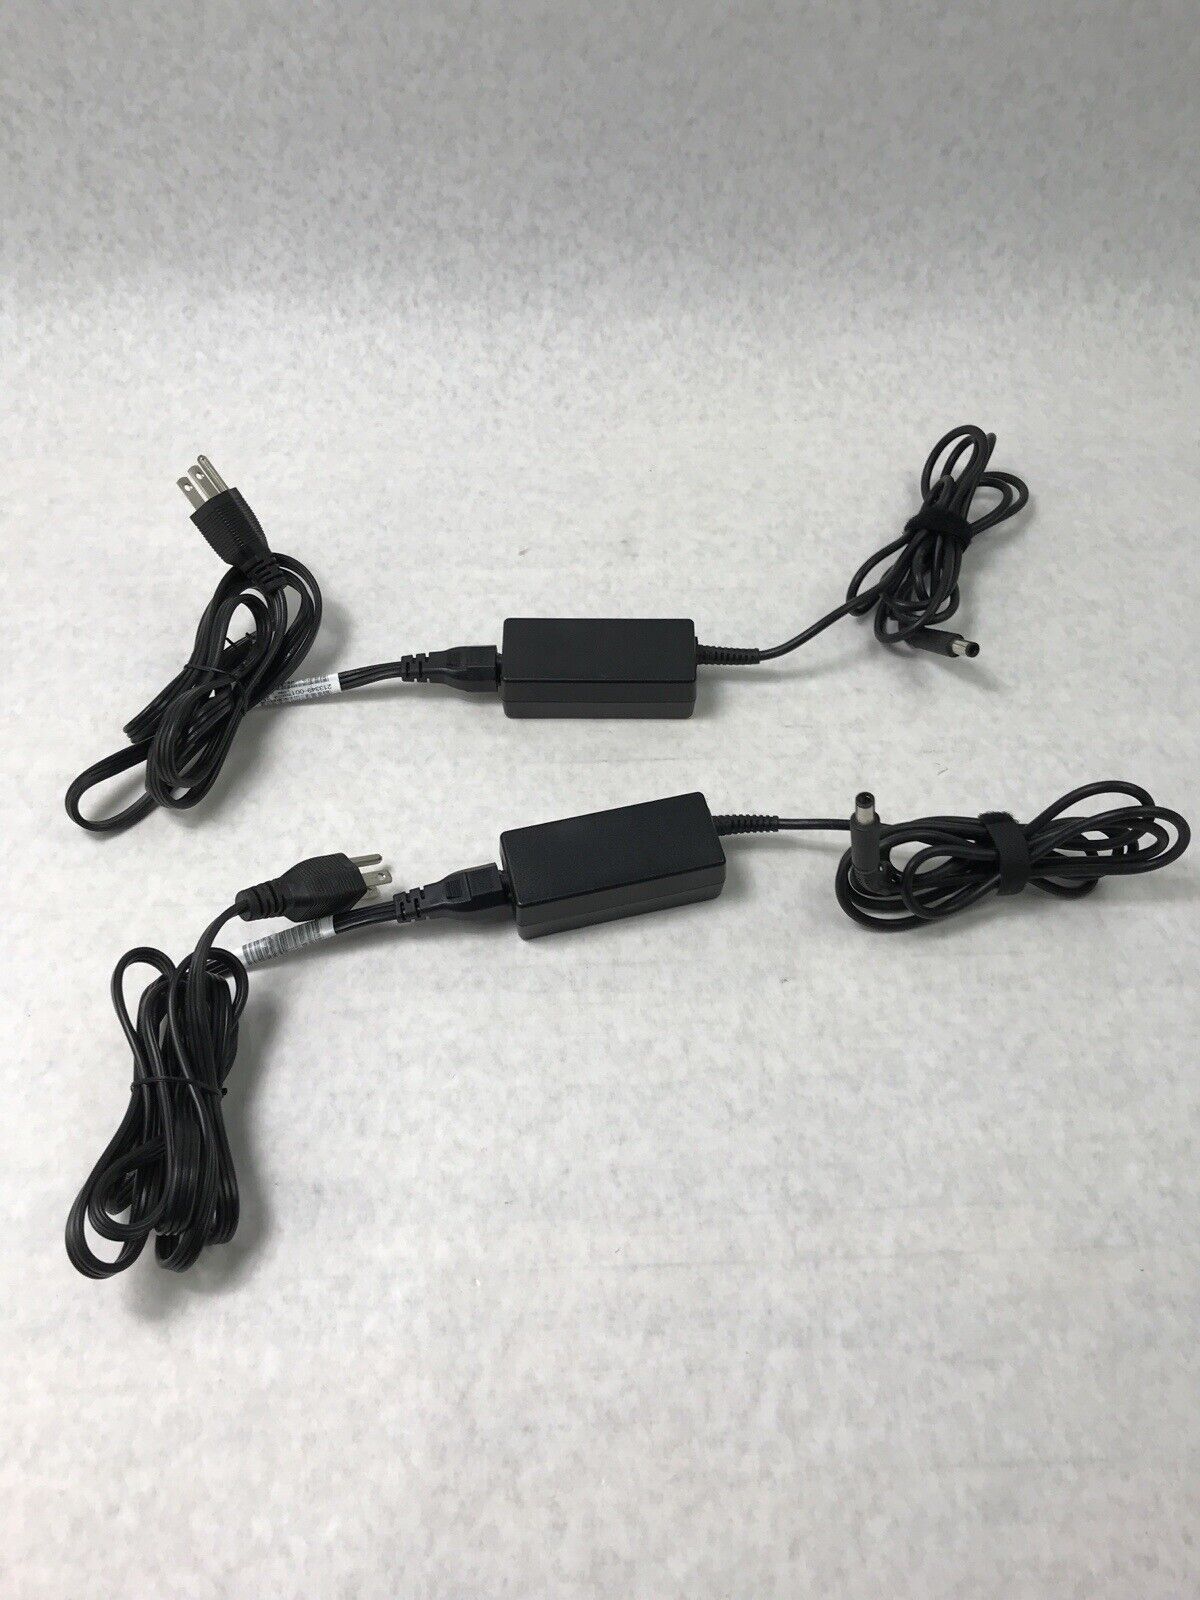 (Lot of 2) HP 608423-001 Laptop Charger 60Hz 19.5V 40W 609938-001 HSTNN-CA17